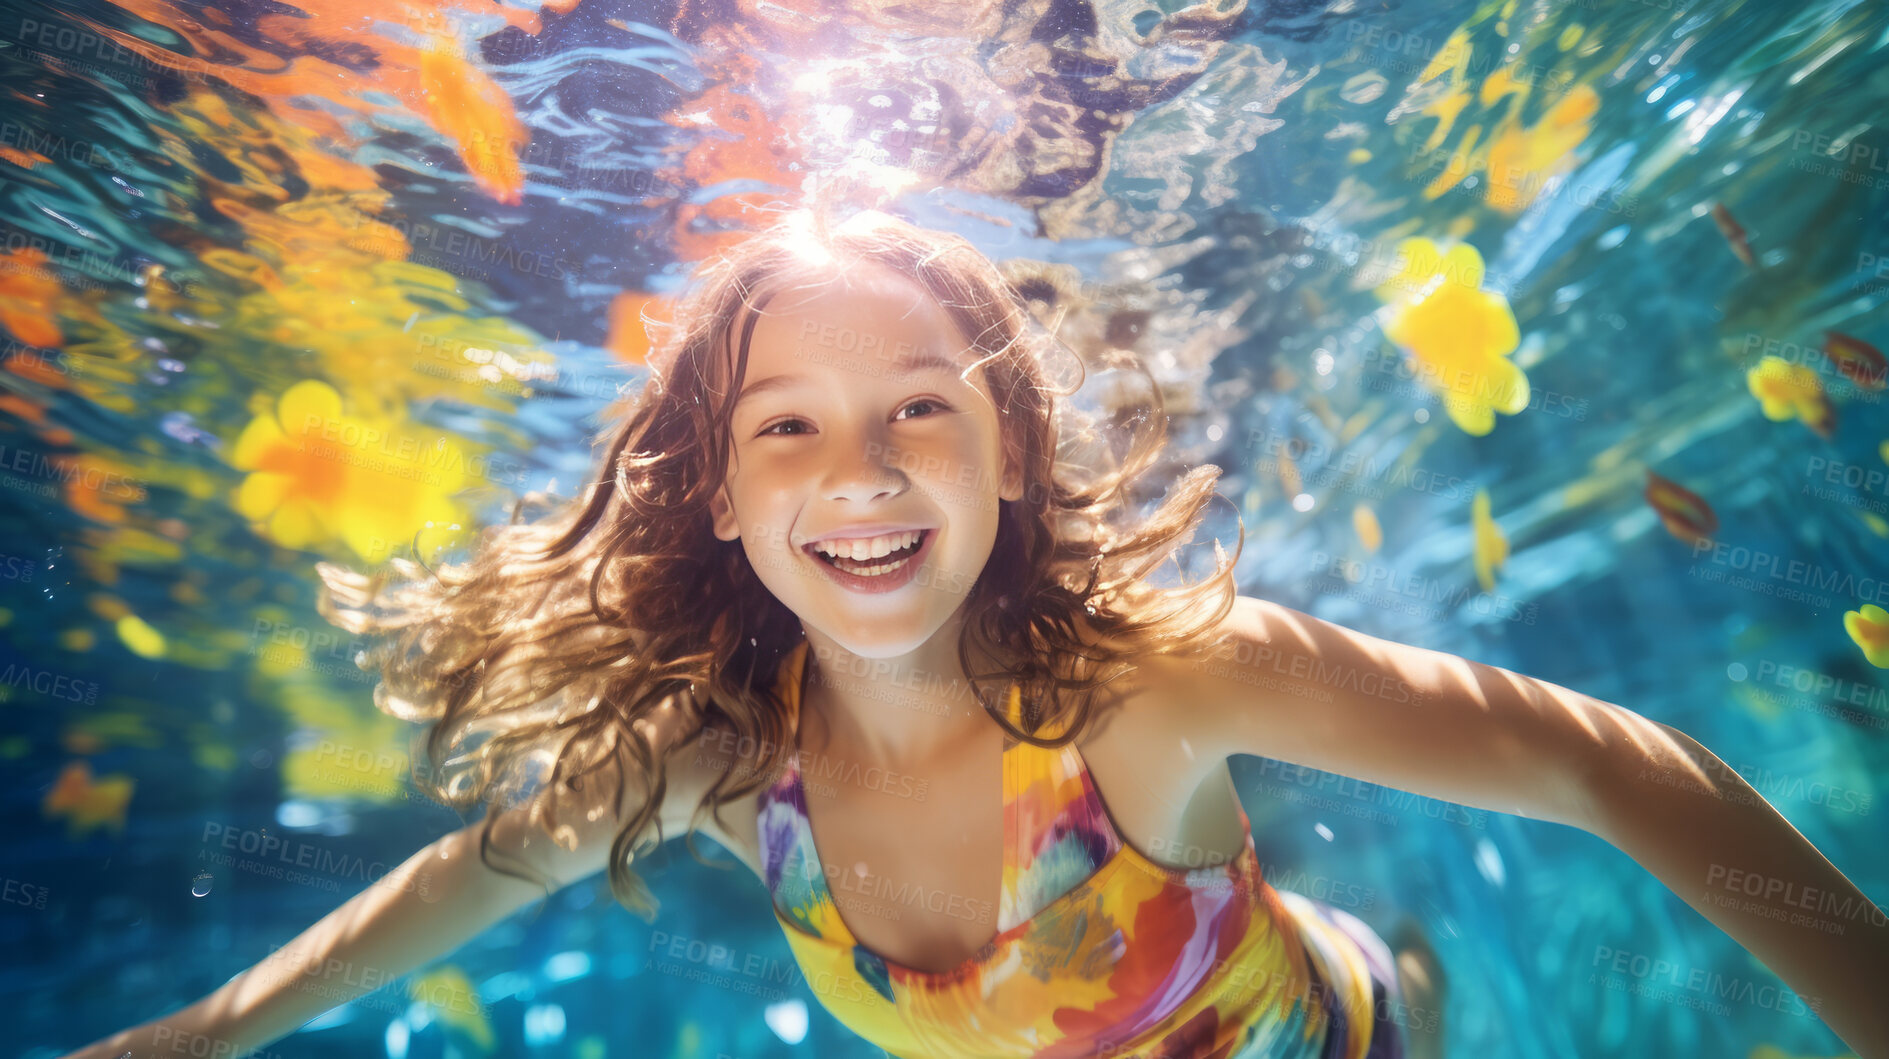 Buy stock photo Portrait of smiling young girl underwater in swimming pool. Vacation, holiday concept.